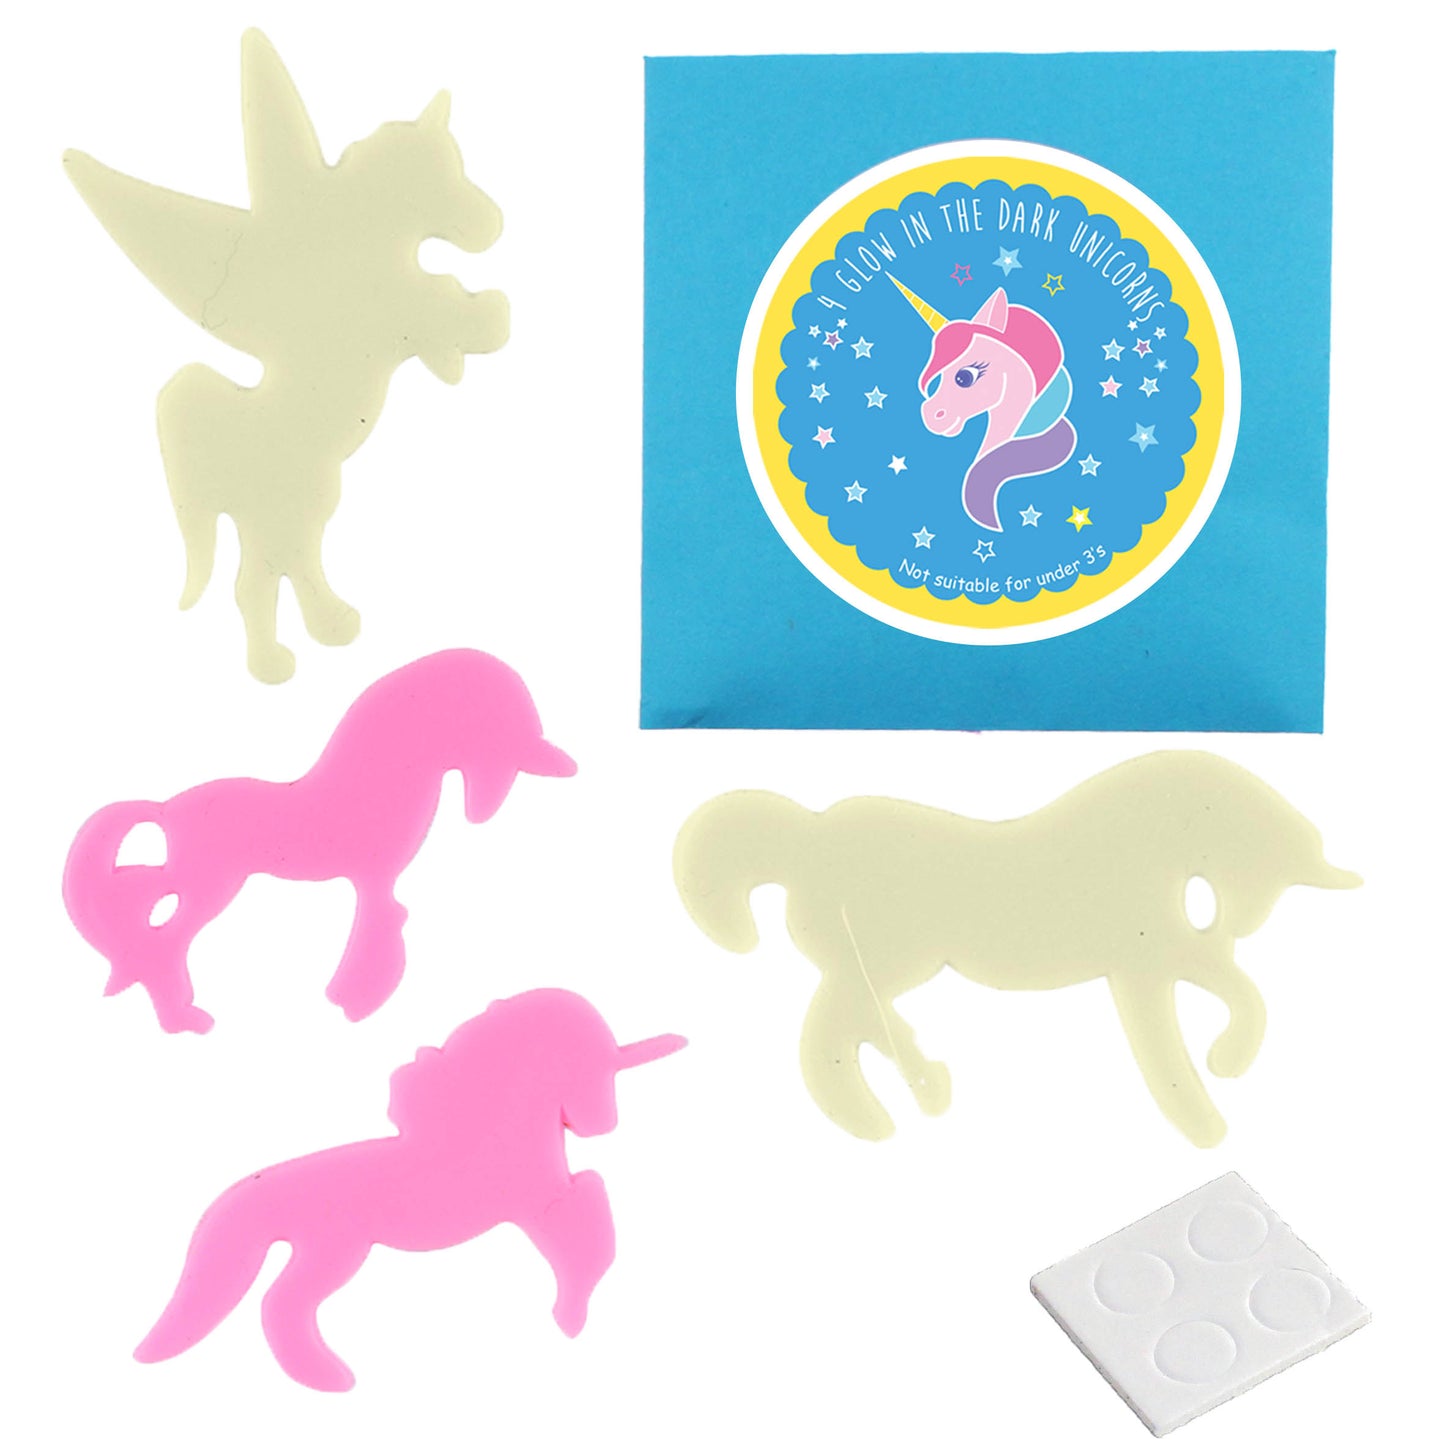 The Unicorn Party Bag - Magical